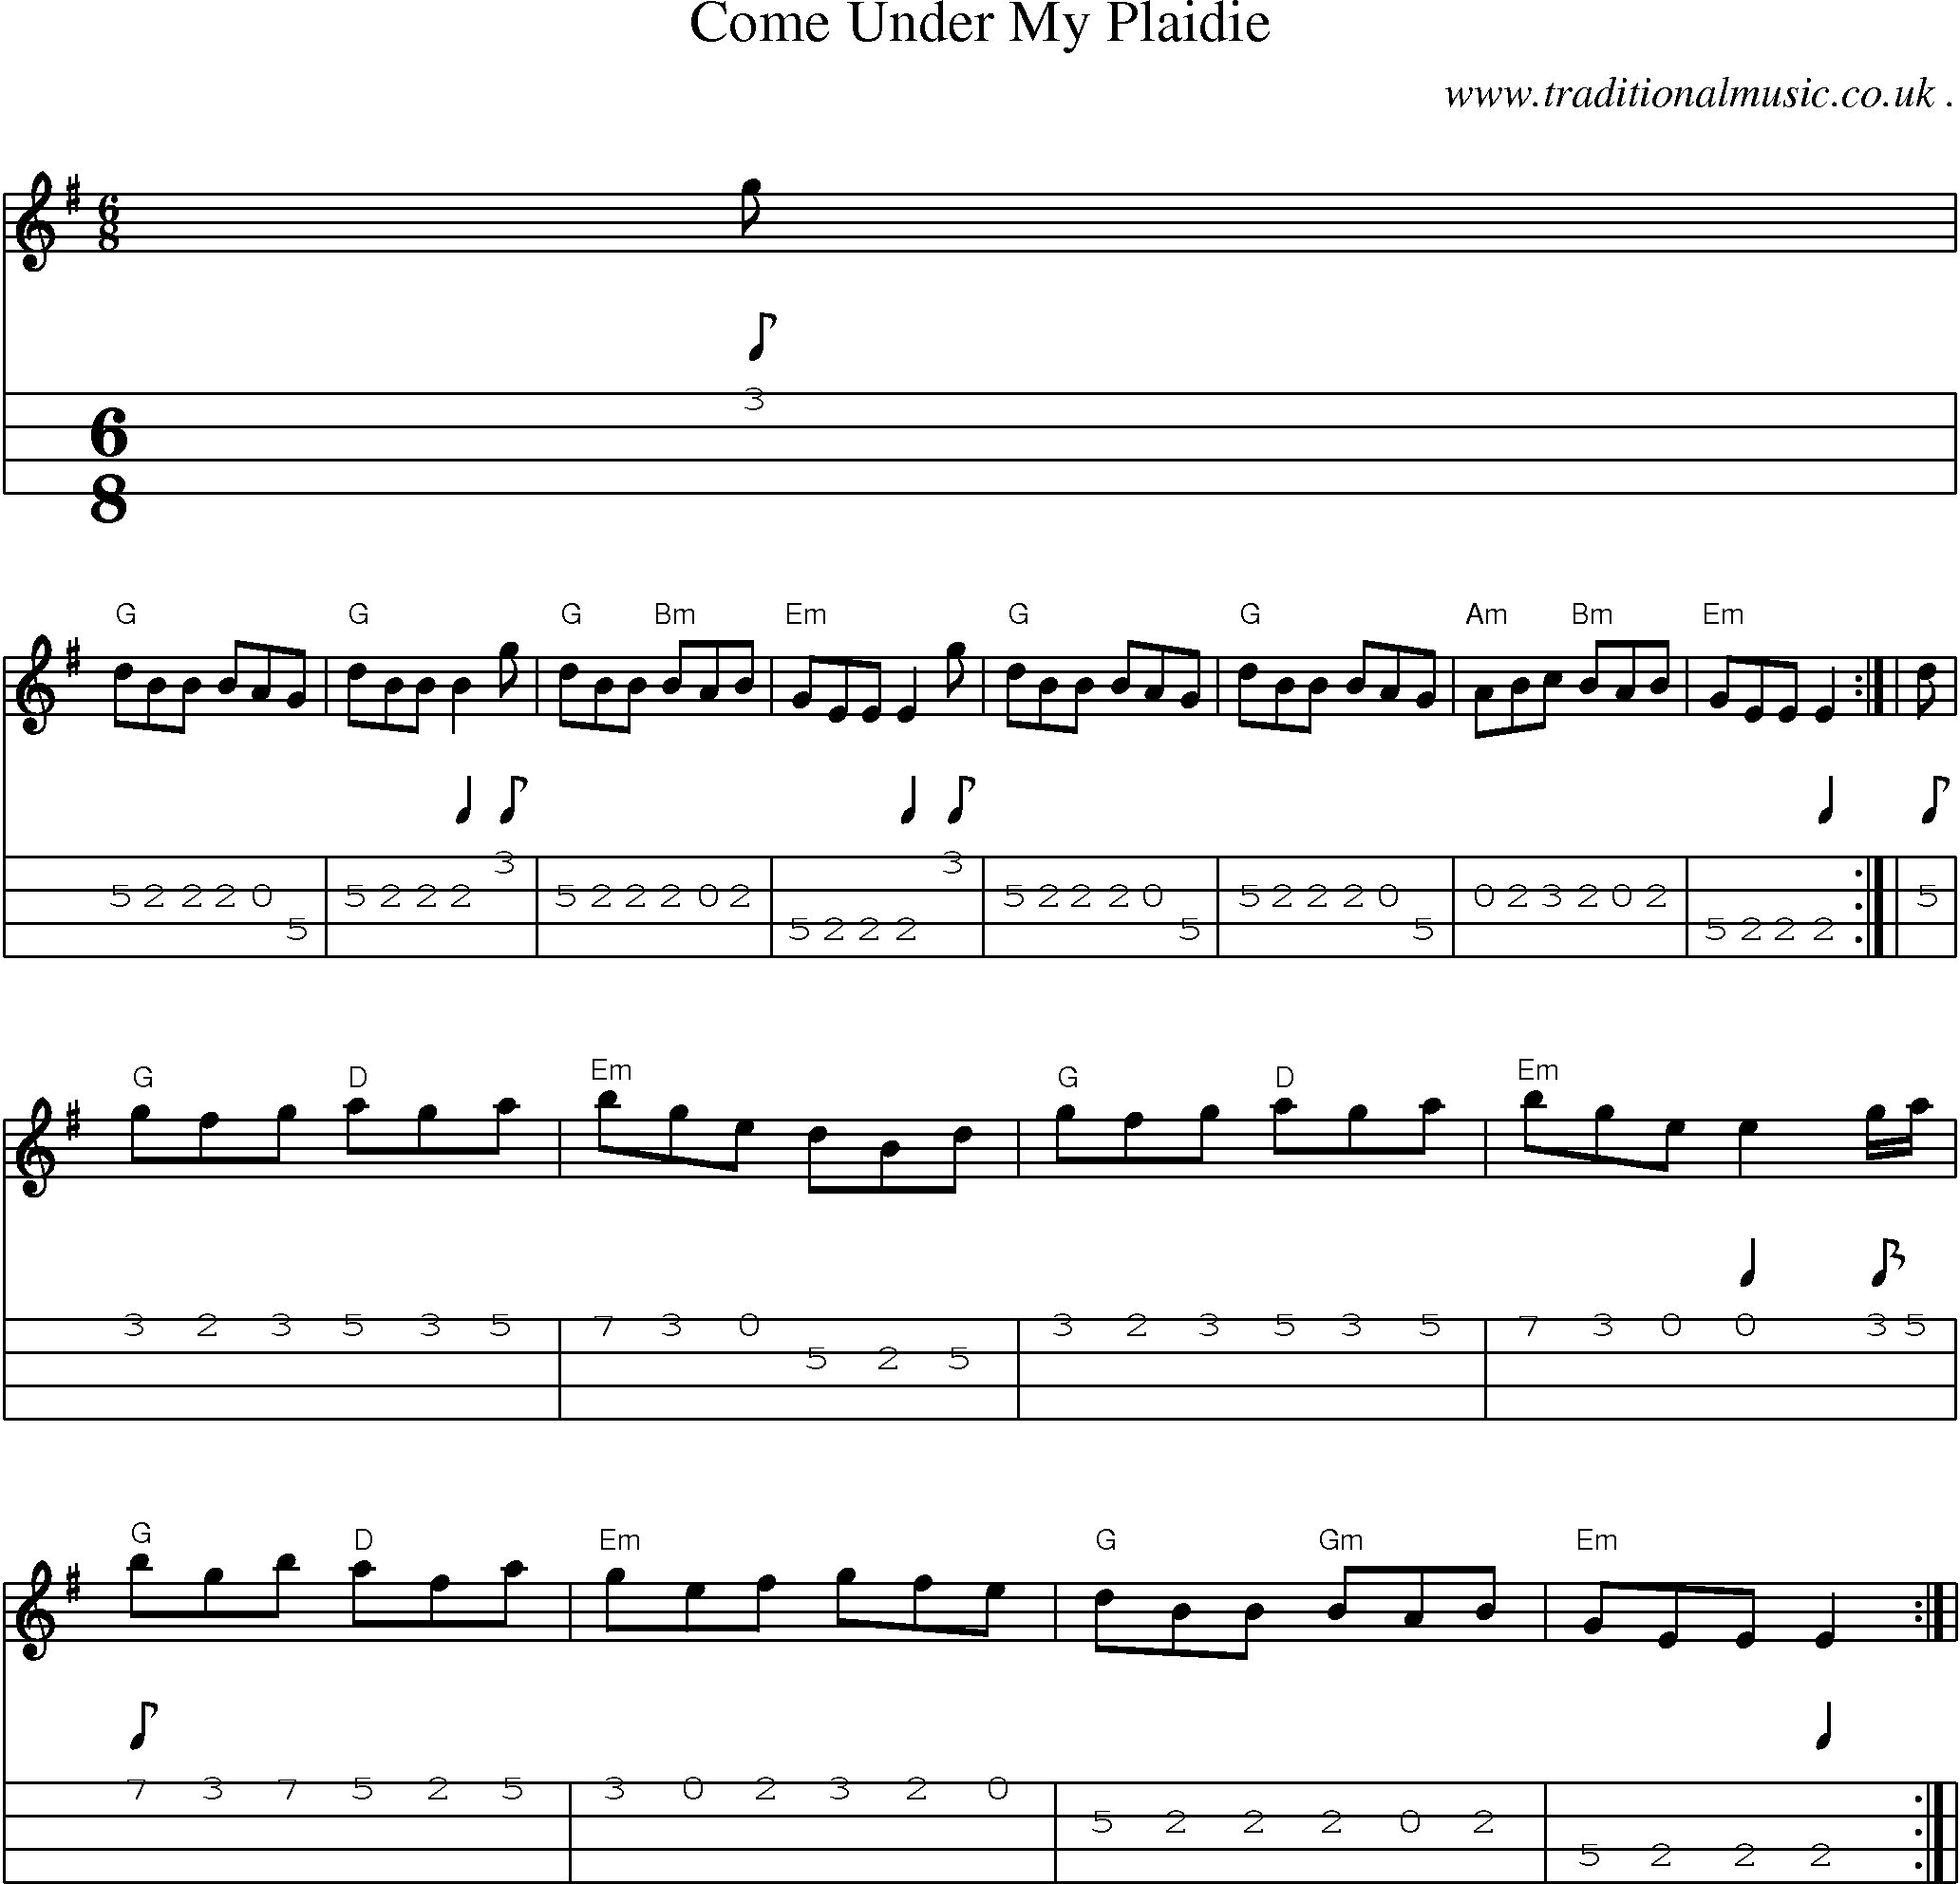 Sheet-music  score, Chords and Mandolin Tabs for Come Under My Plaidie